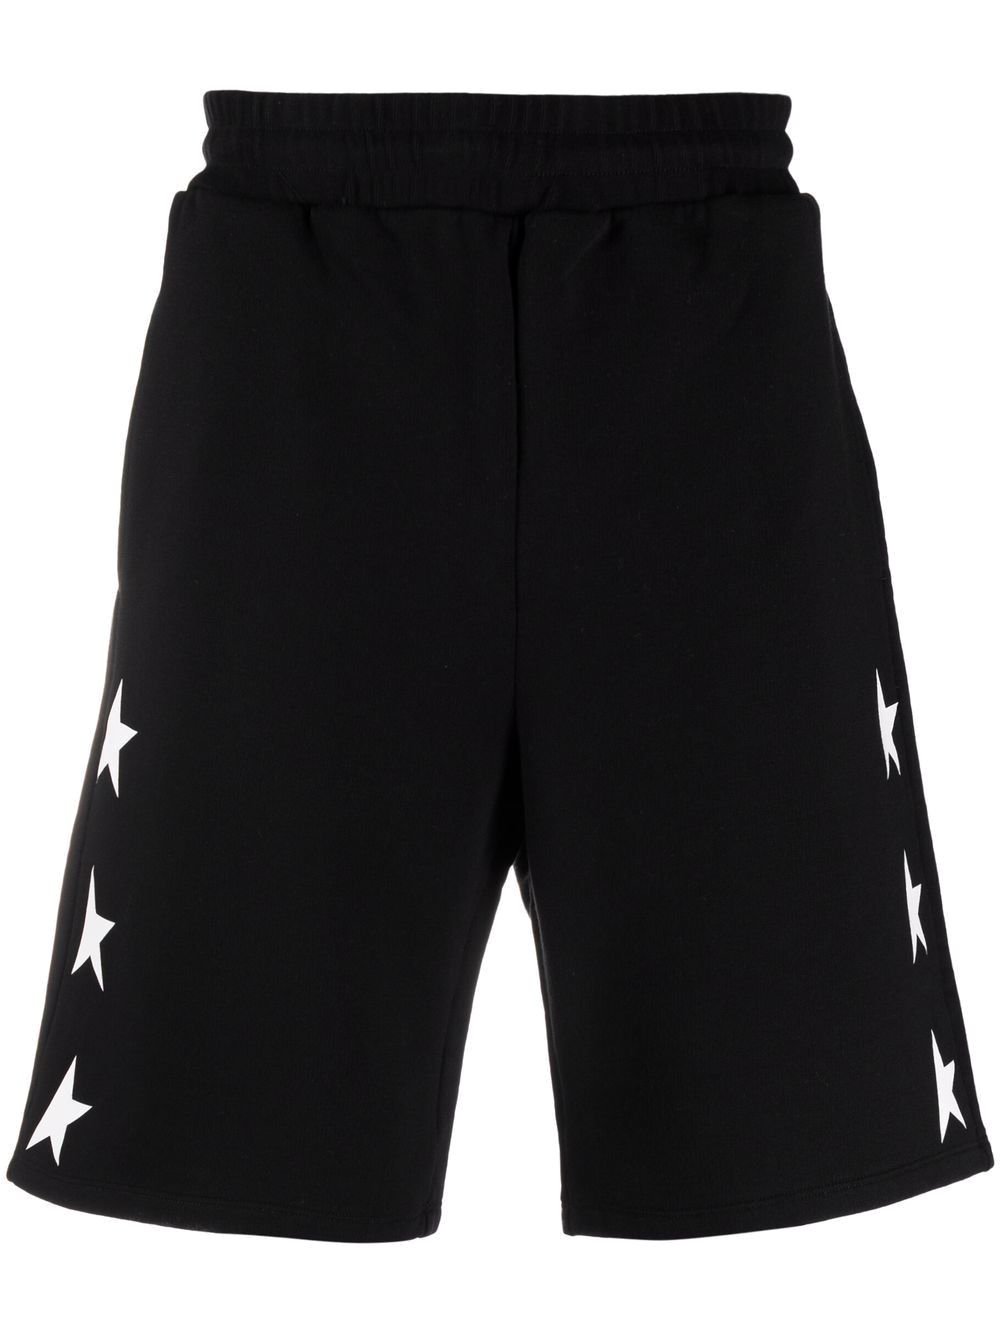 Shorts with star print